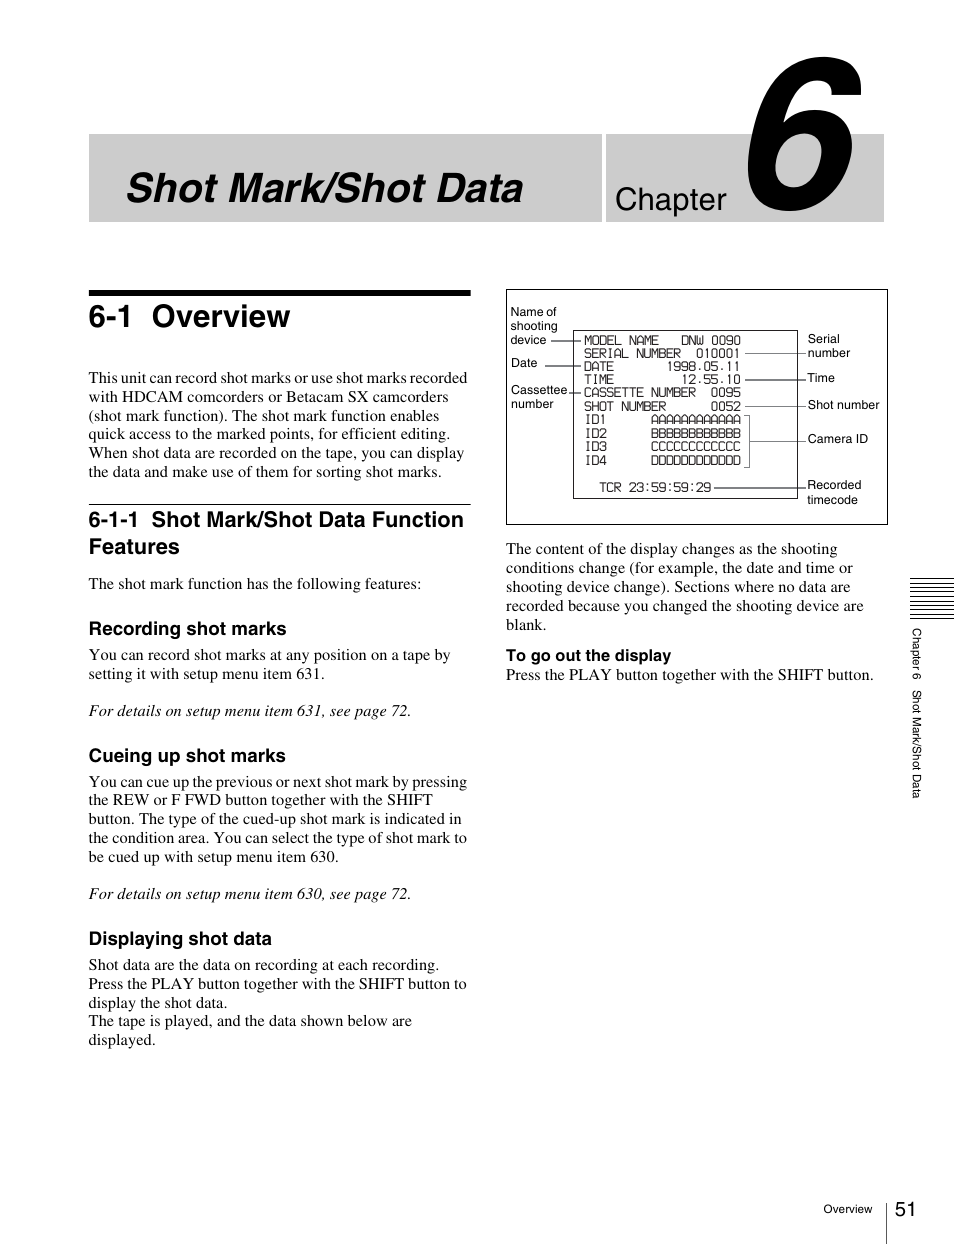 Chapter 6 shot mark/shot data, 1 overview, 1-1 shot mark/shot data function features | Overview, Shot mark/shot data function features, Shot mark/shot data, Chapter | Sony HDW-S280 User Manual | Page 51 / 94